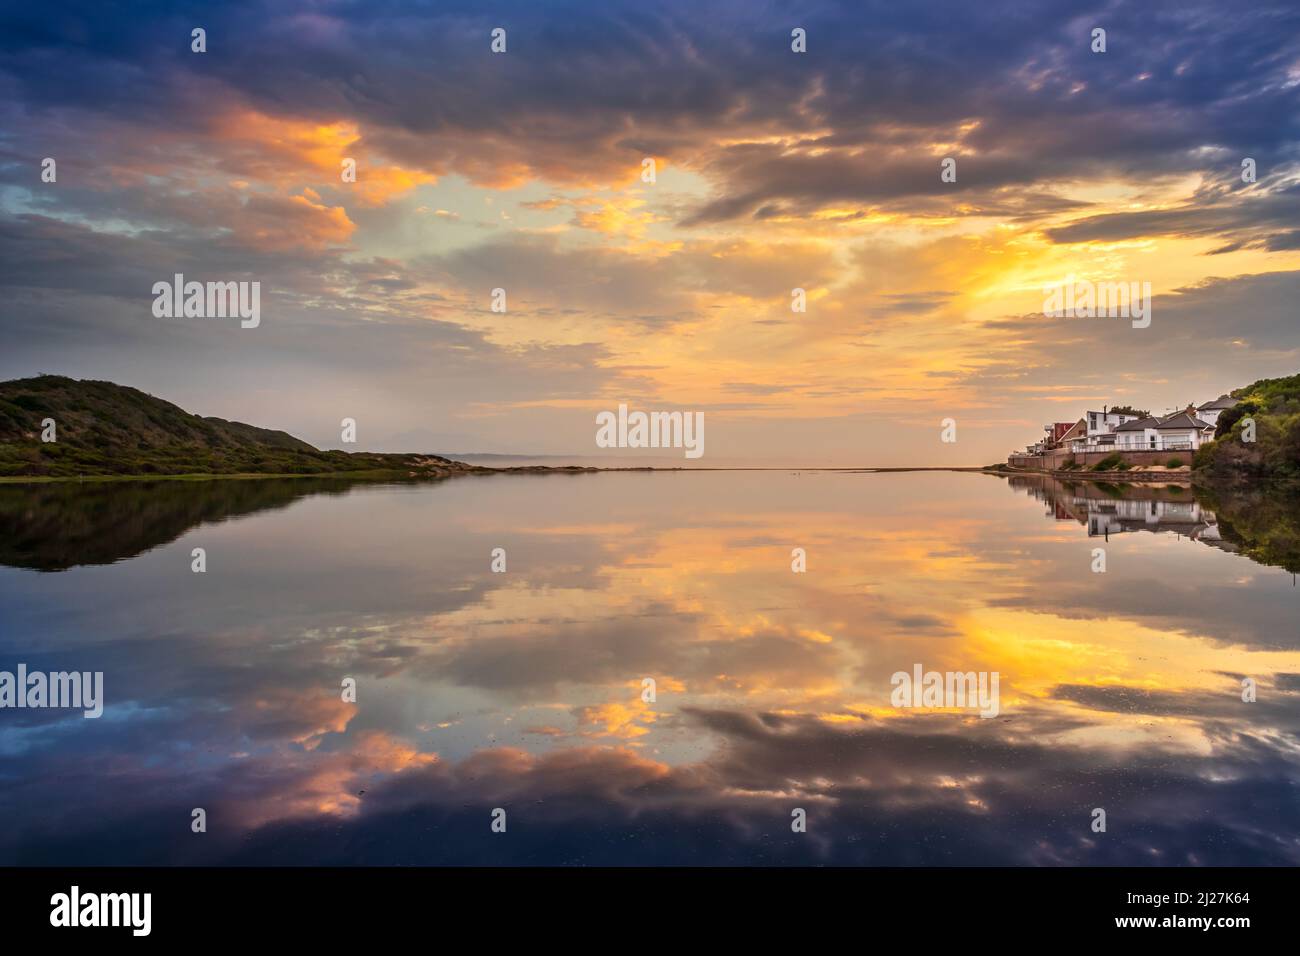 Overcast cloudy sunrise over Mossel bay lagoon. Mossel bay, Western Cape, South Africa Stock Photo